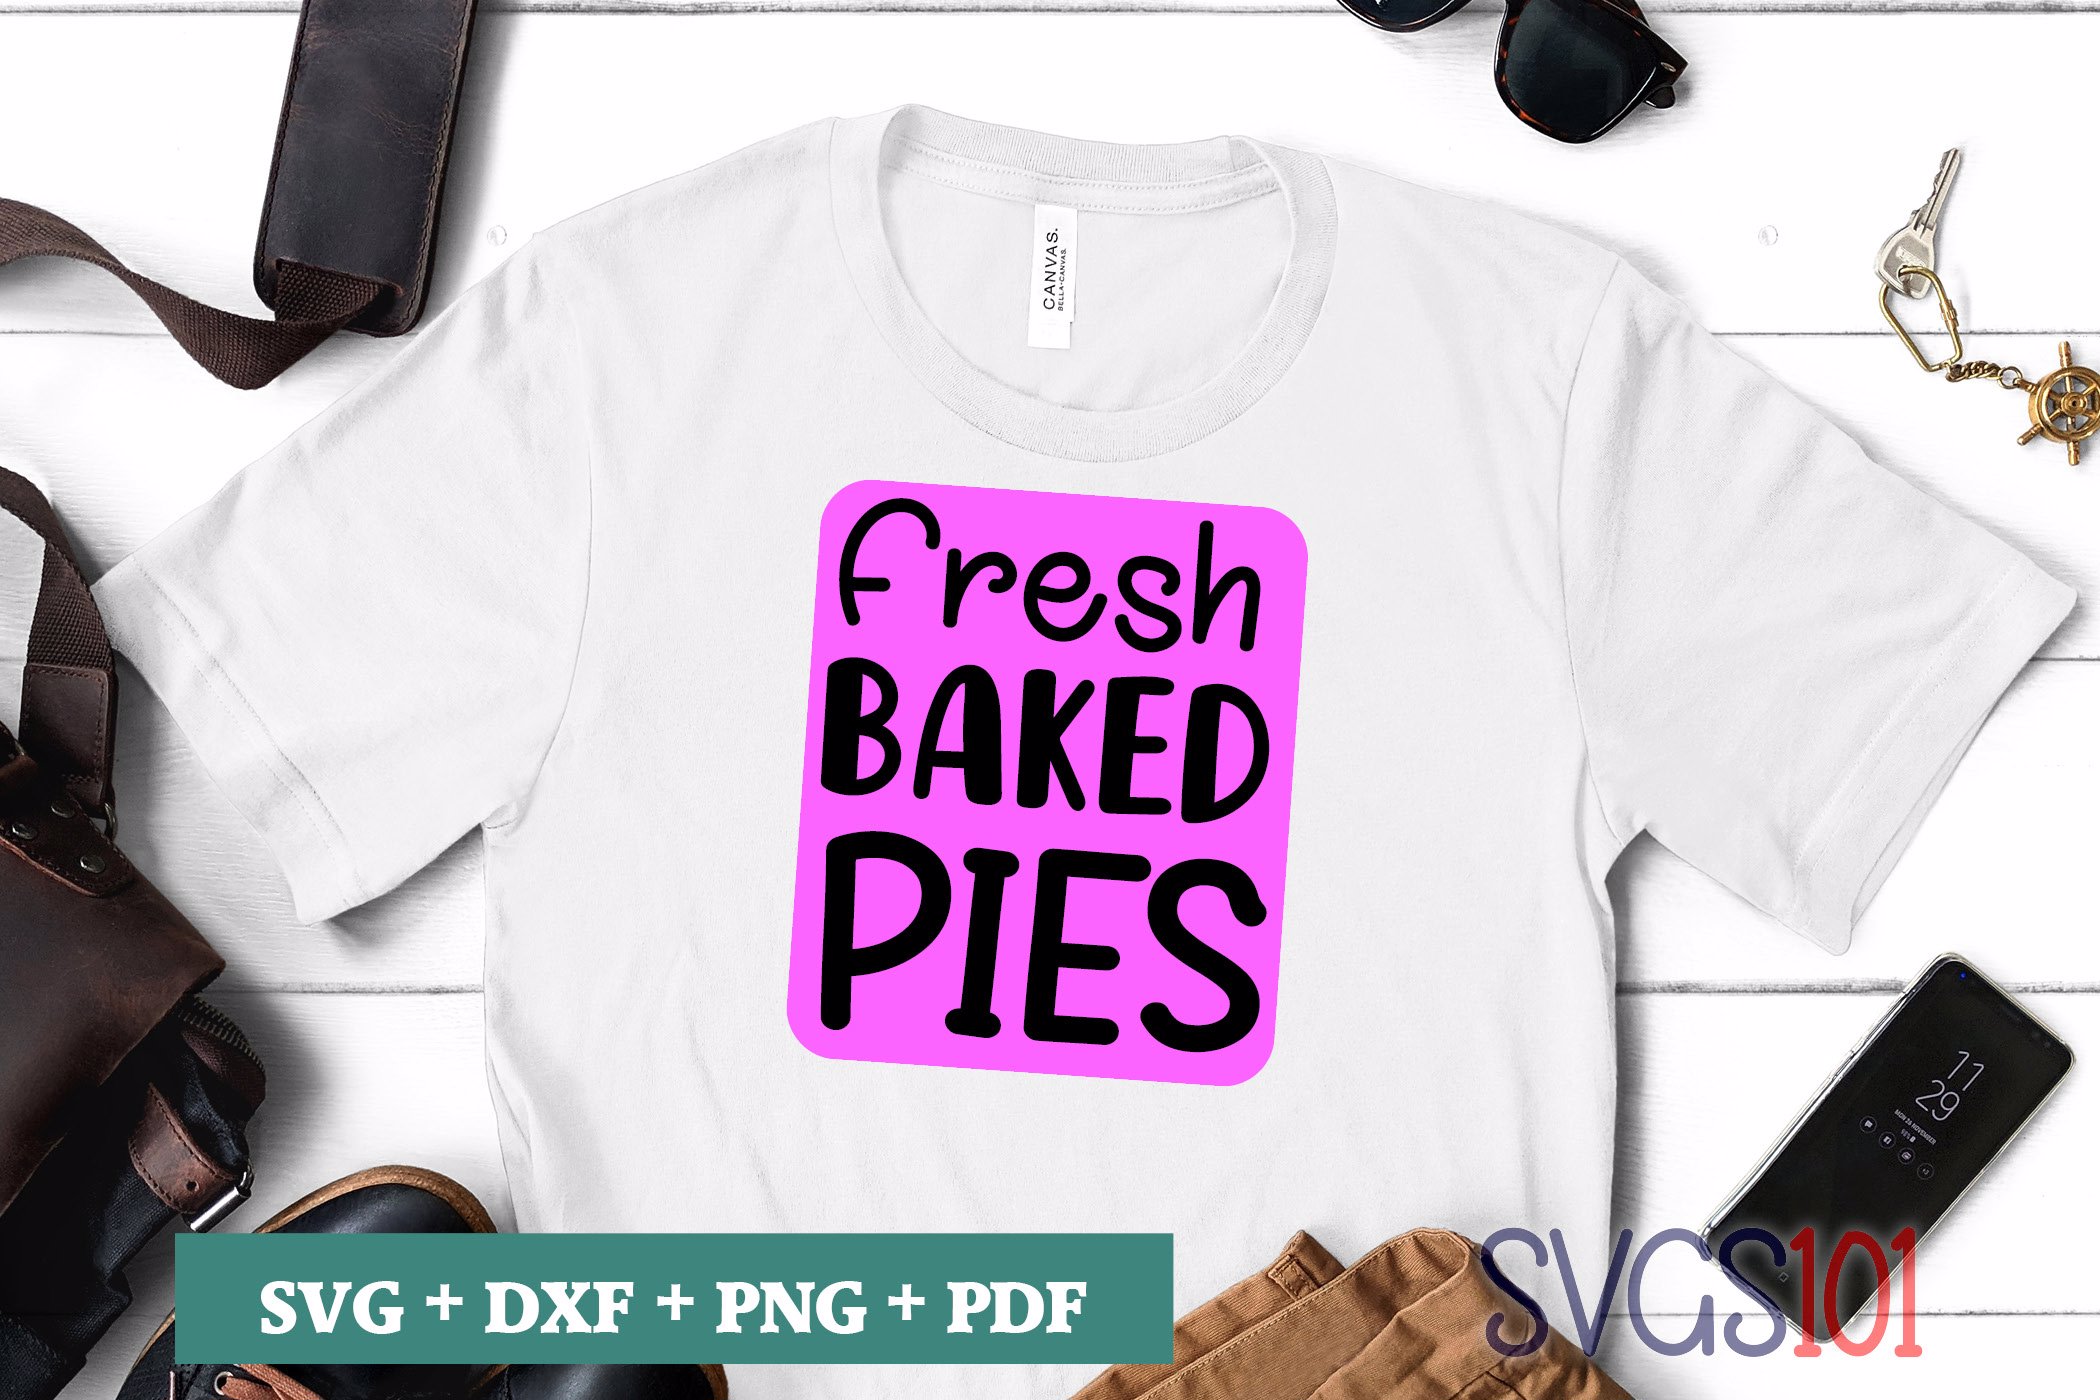 Fresh Baked Pies SVG Cuttable file - DXF, EPS, PNG, PDF | SVG Cutting File